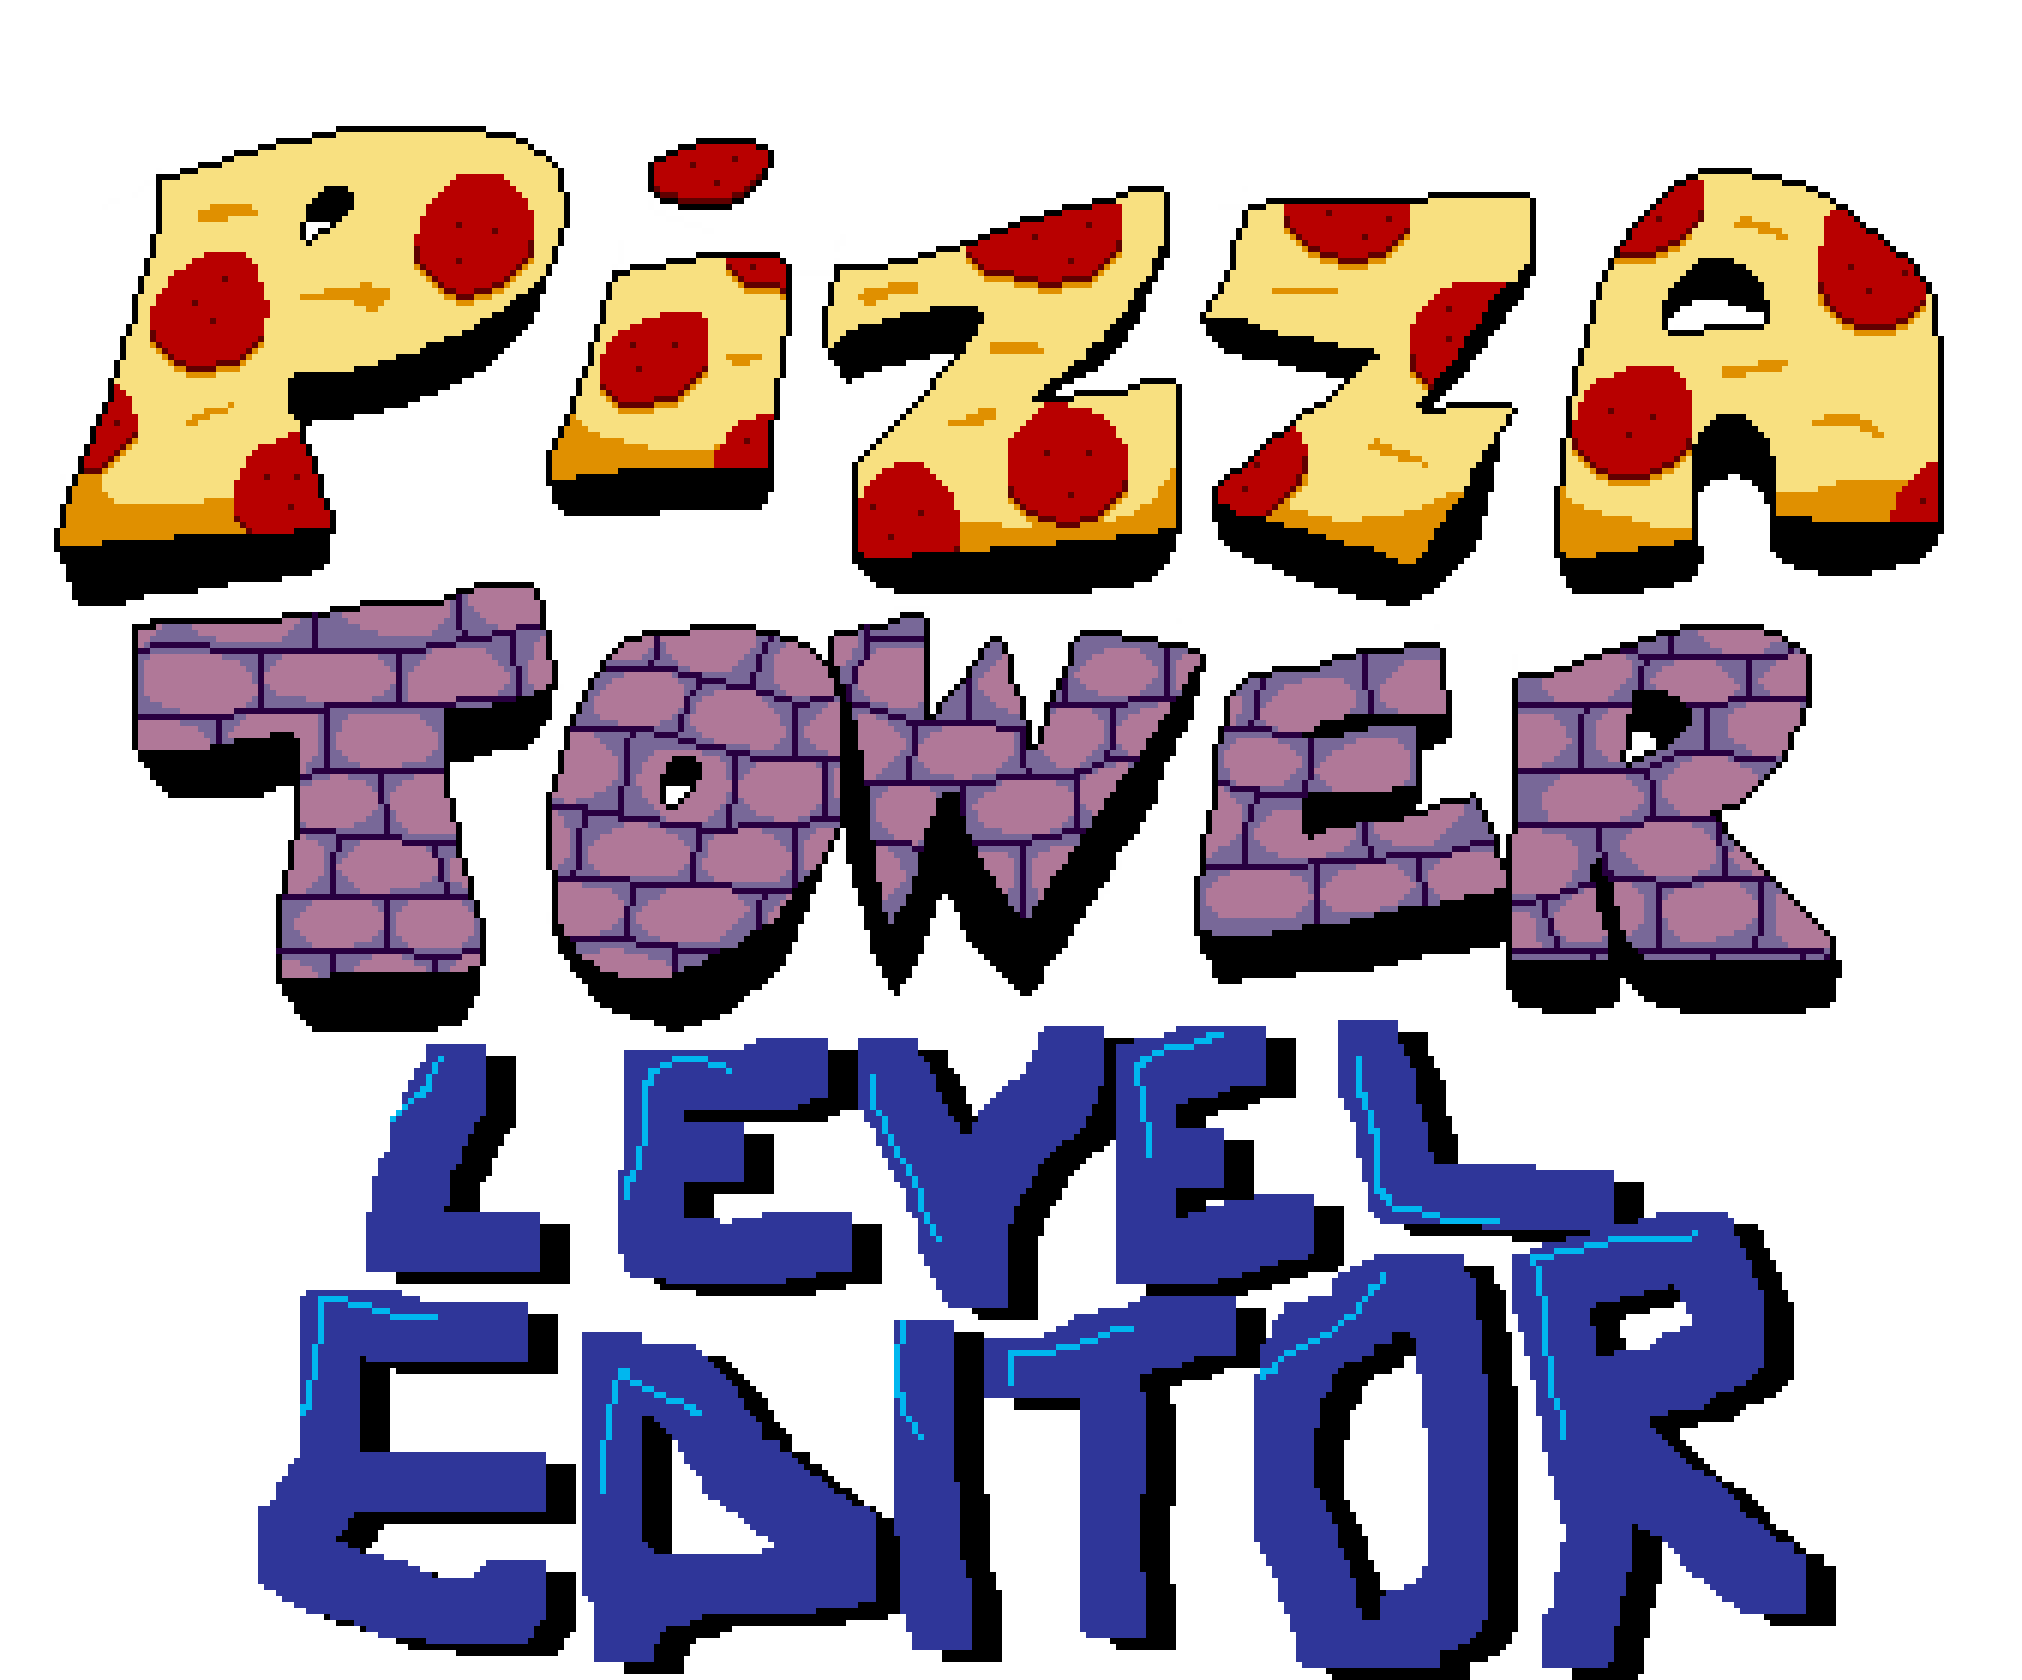 Classic Pizza Tower Level Editor V4.5